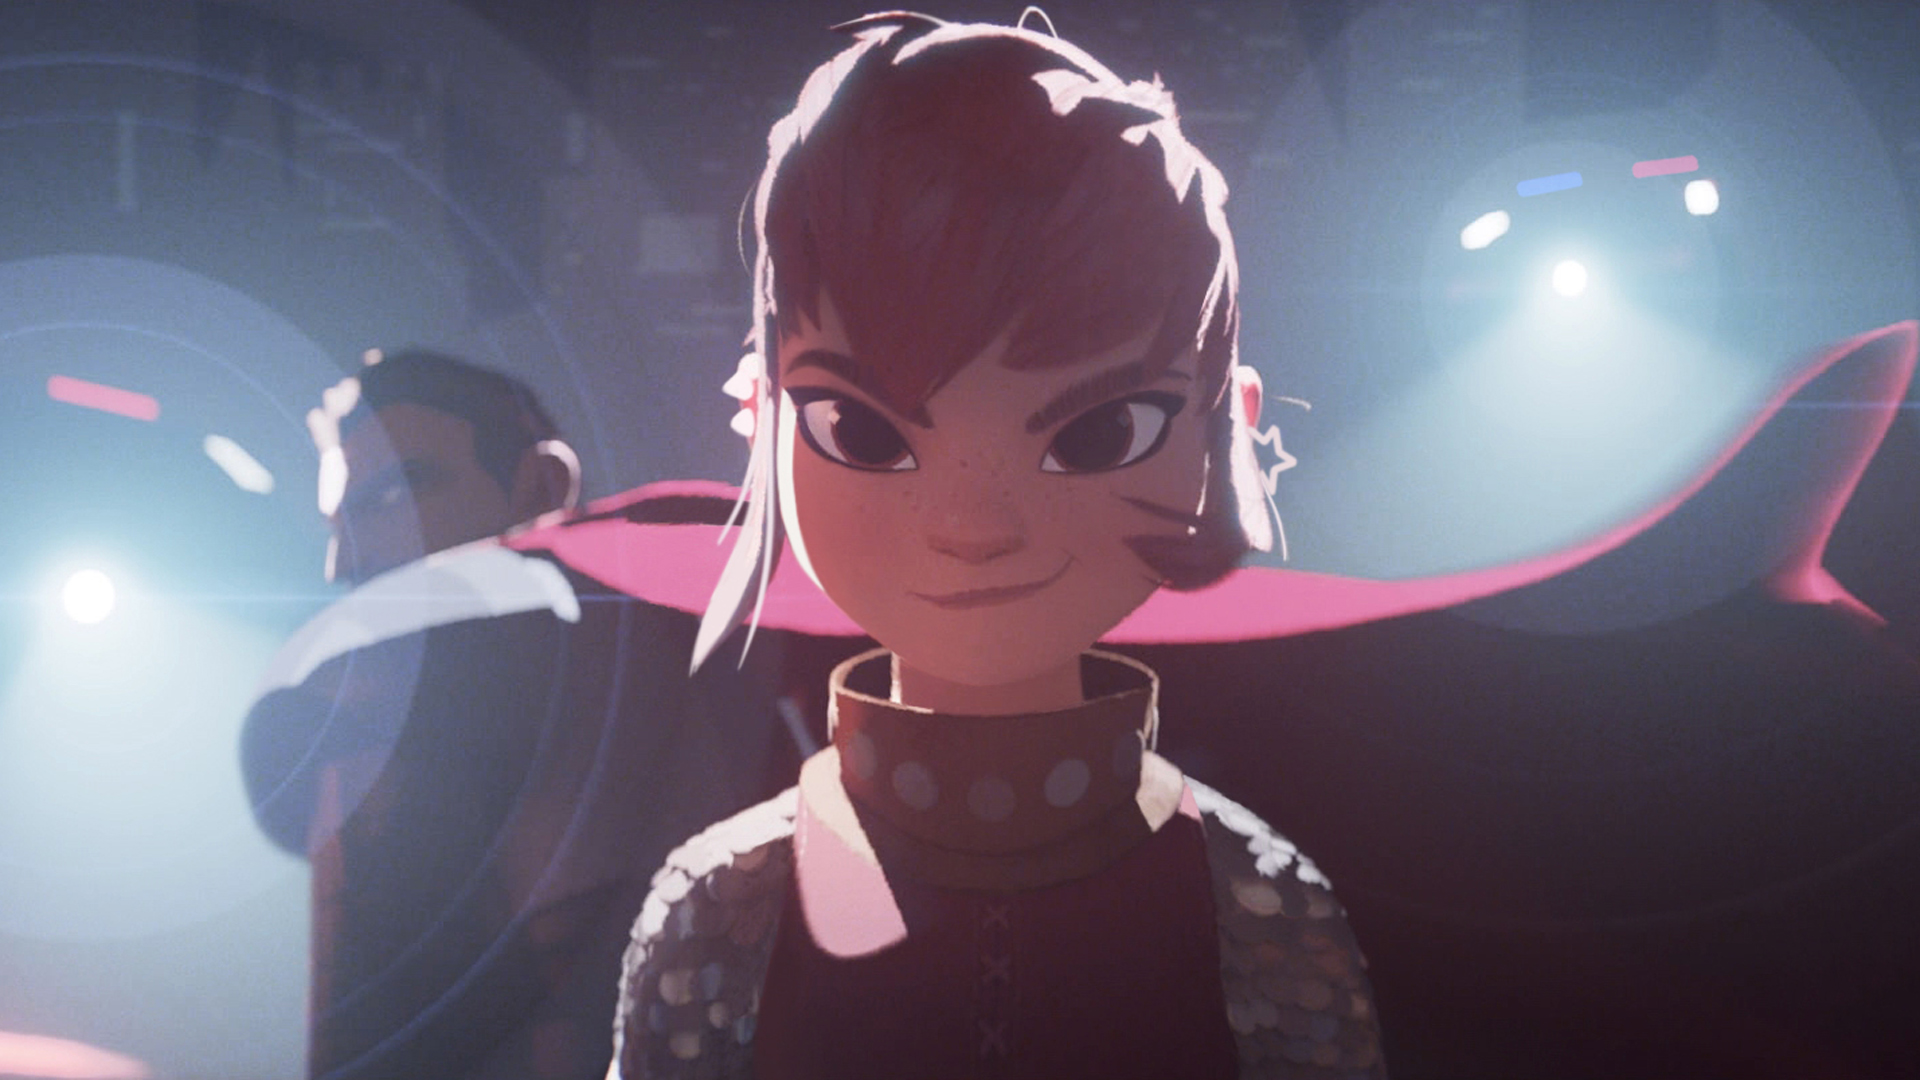 Nimona smiles as she stares into the camera in her upcoming Netflix movie